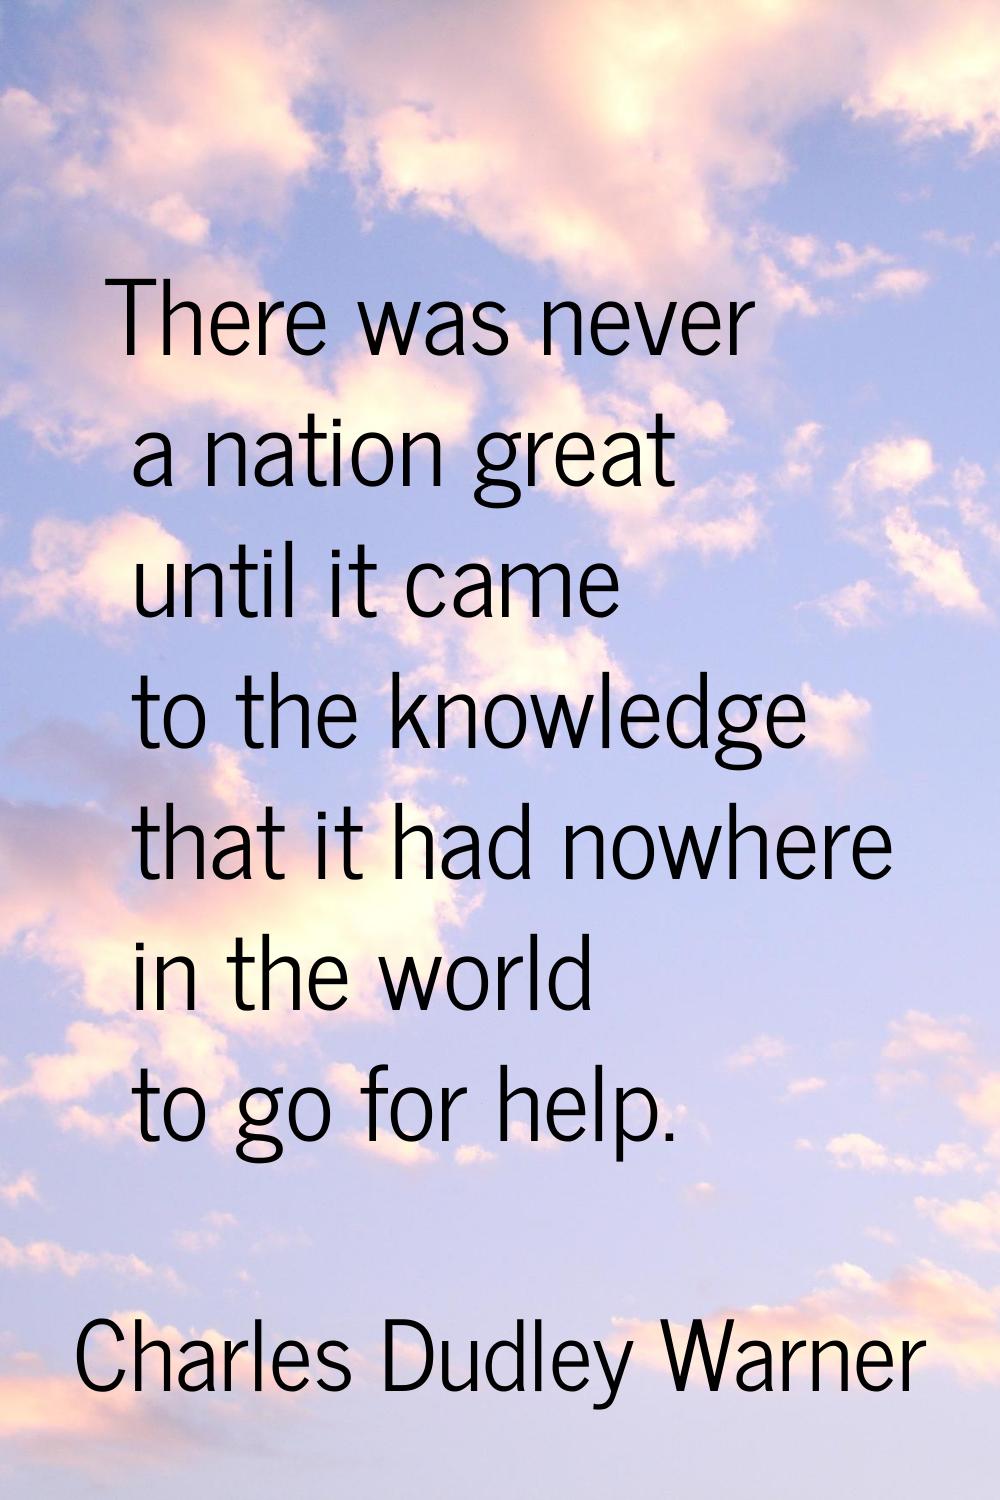 There was never a nation great until it came to the knowledge that it had nowhere in the world to g